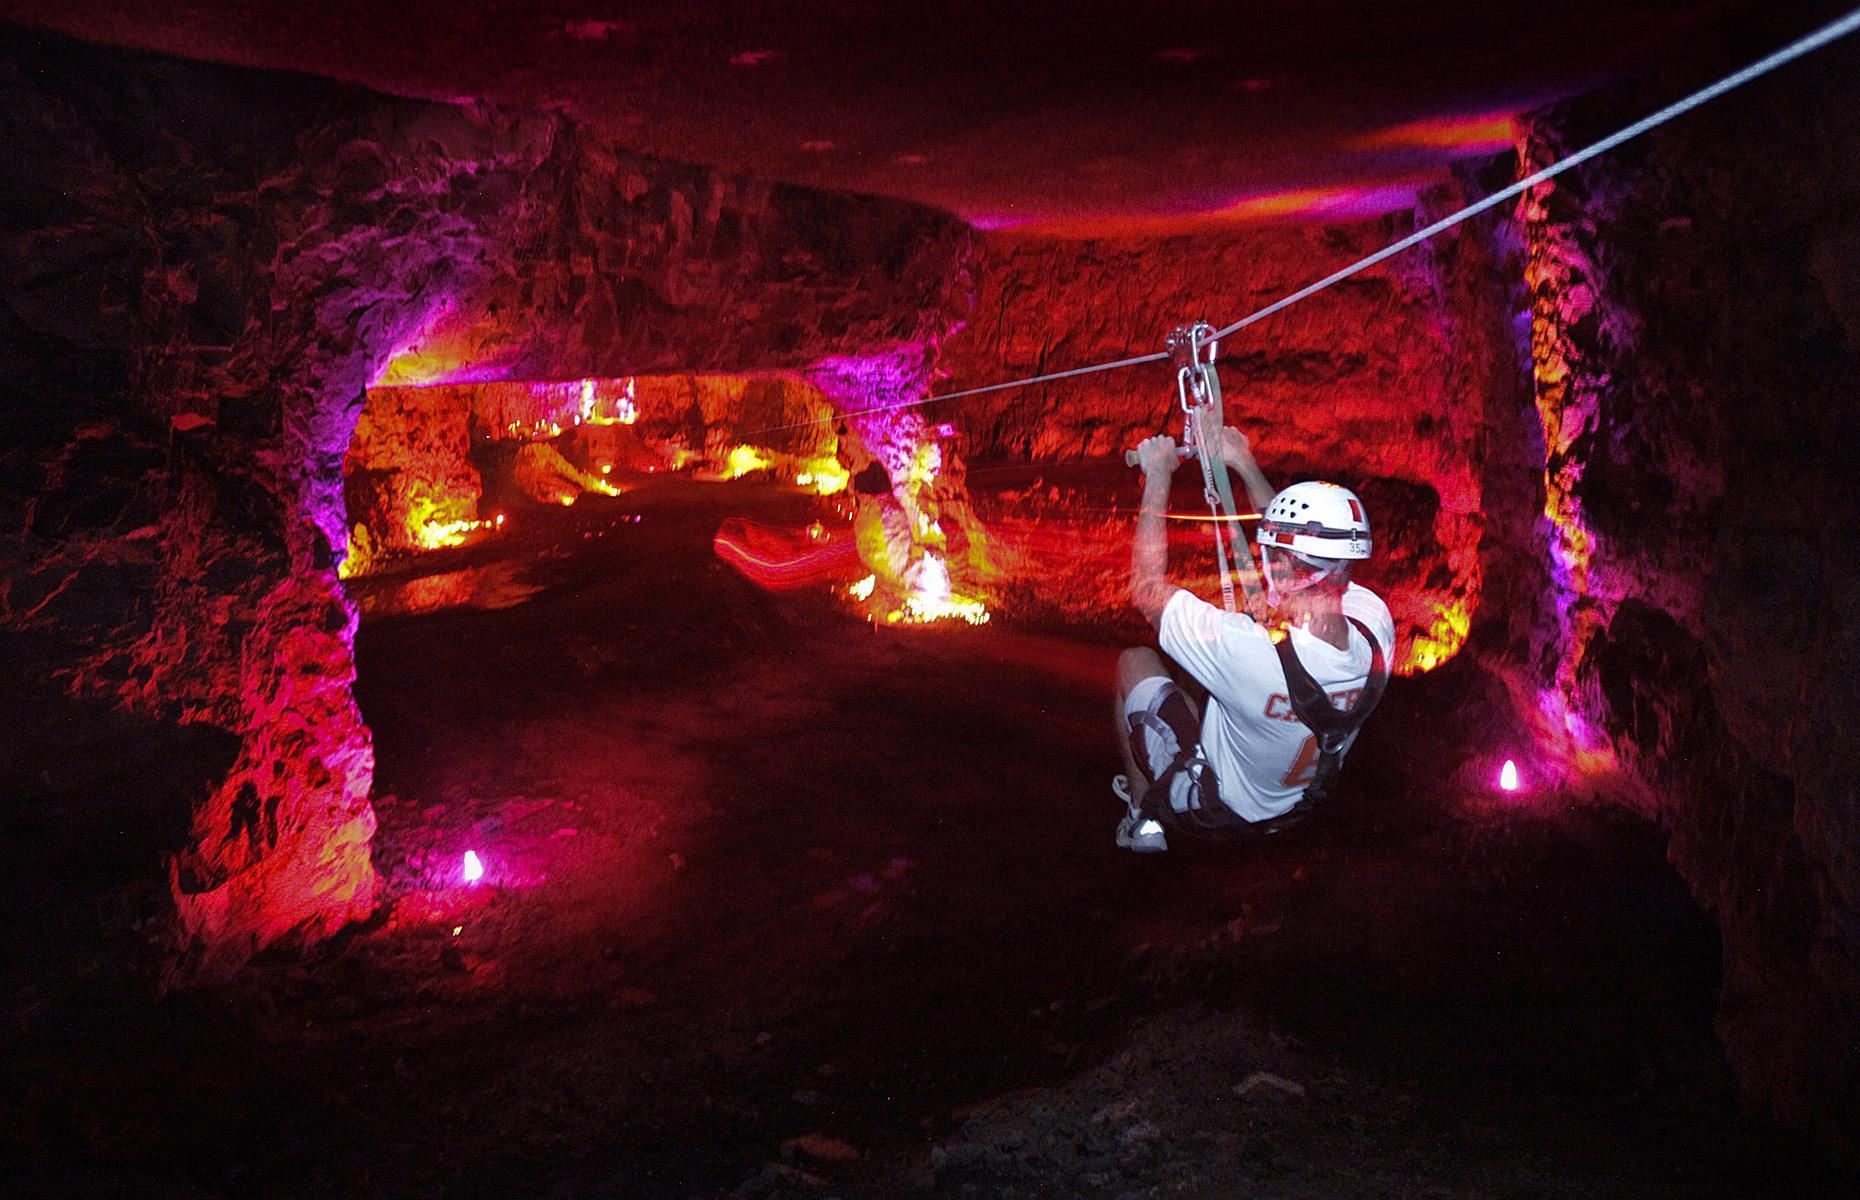 America’s cities and scenery may be spectacular, but have you ever thought about what lies beneath? From labyrinthine caves and hidden towns to subterranean hot springs, we bring you some of the most awe-inspiring underground experiences in the USA.